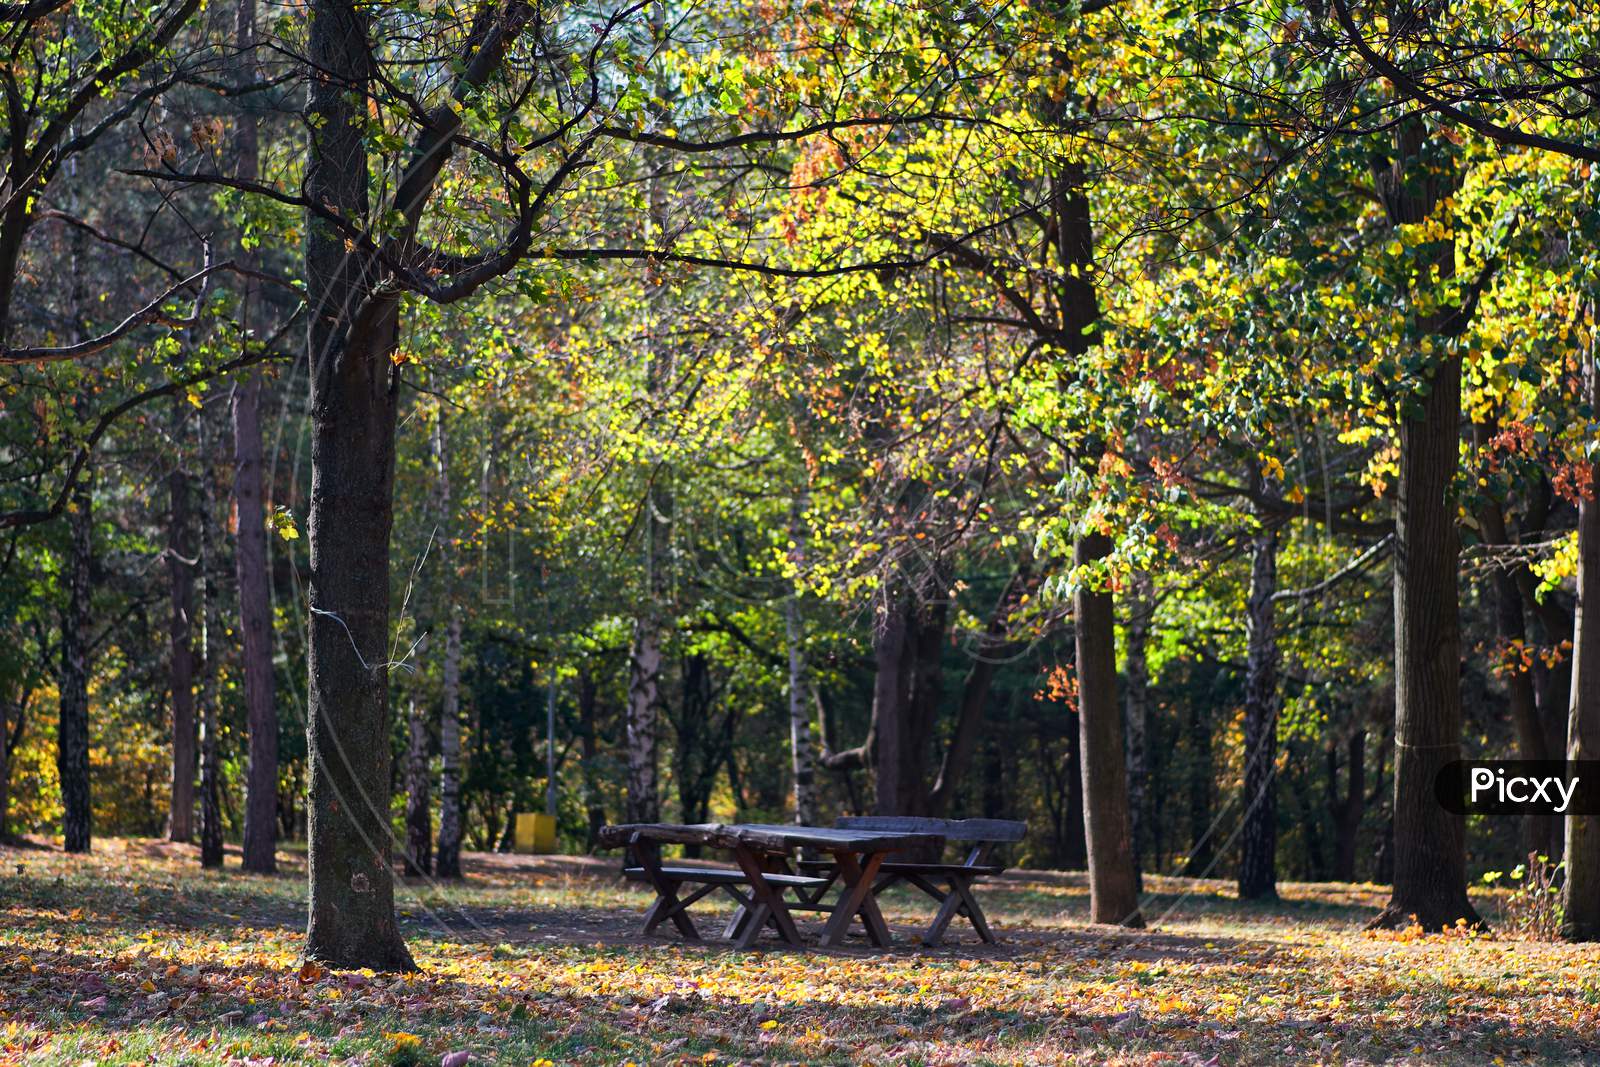 Picnic Table In Zvezdara Forest Park In Belgrade, Serbia, With Autumn Foliage